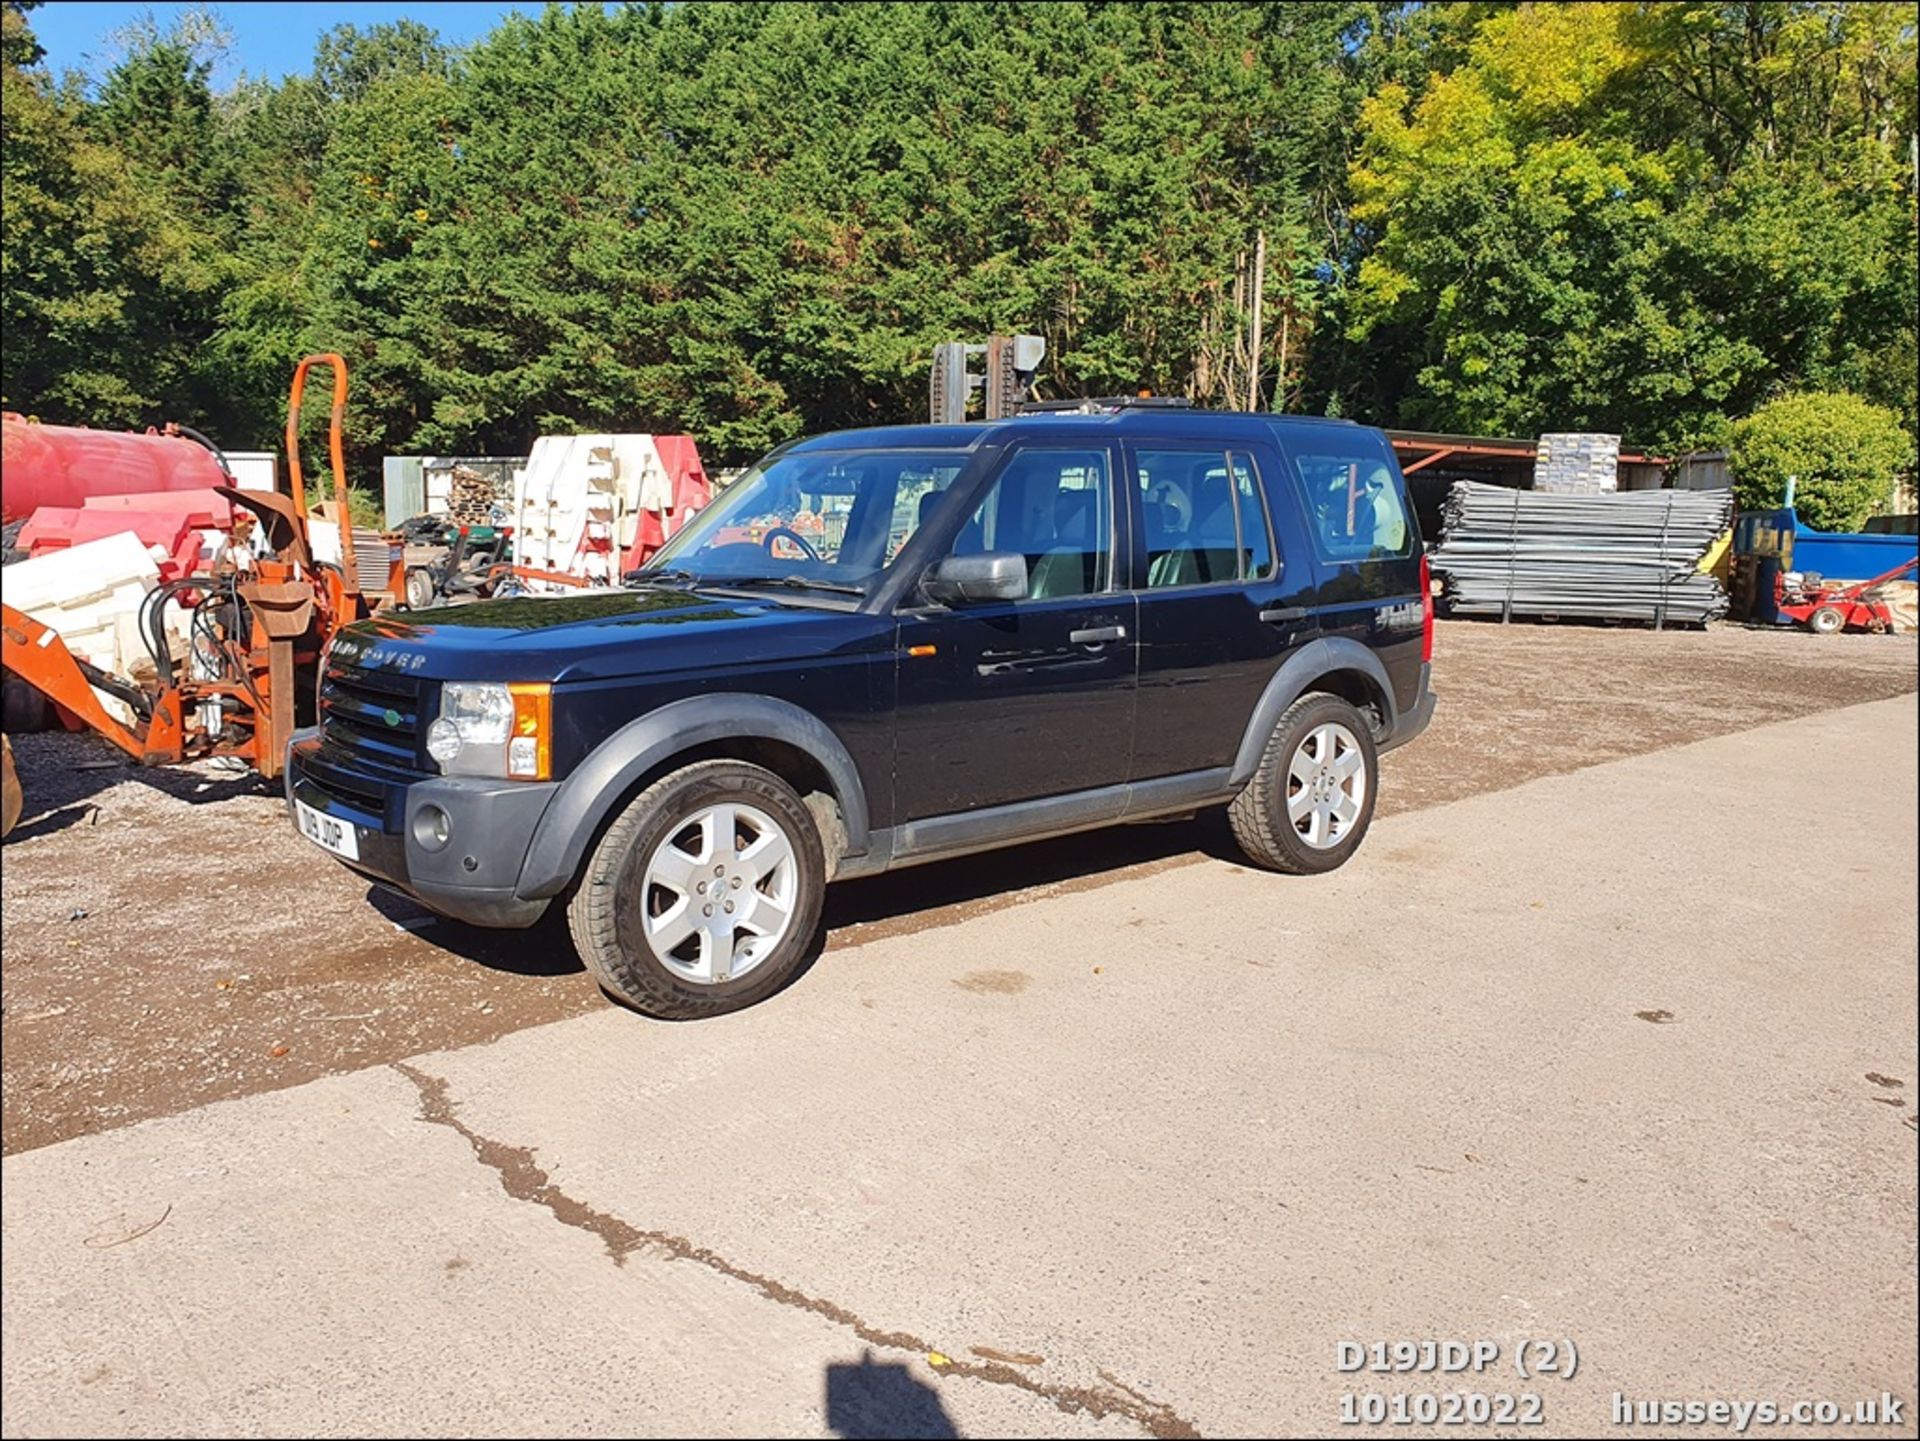 2008 LAND ROVER DISCOVERY TDV6 HSE A - 2720cc 5dr Estate (Blue, 164k) - Image 3 of 36